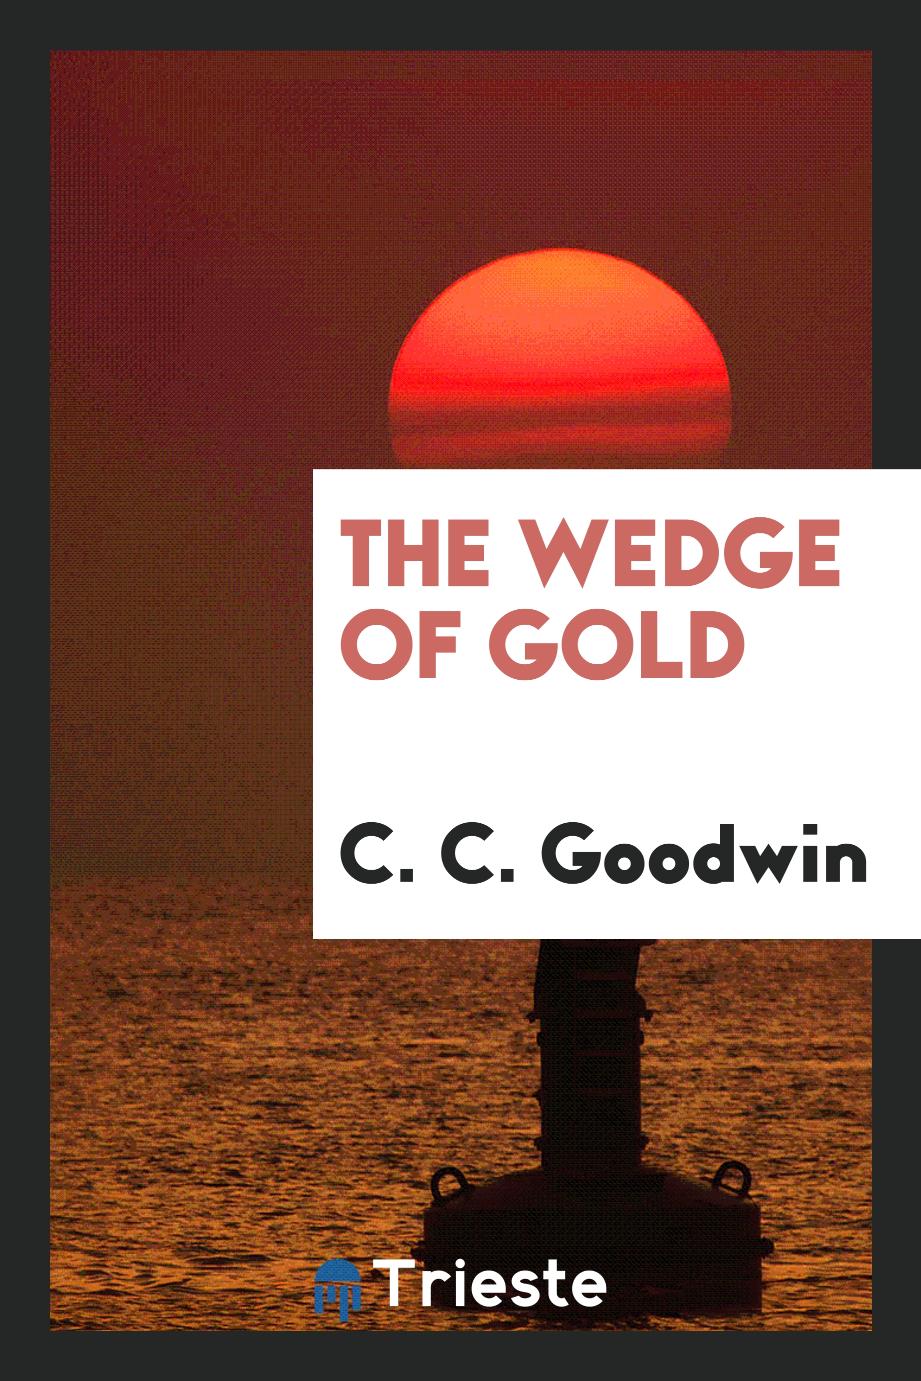 The wedge of gold